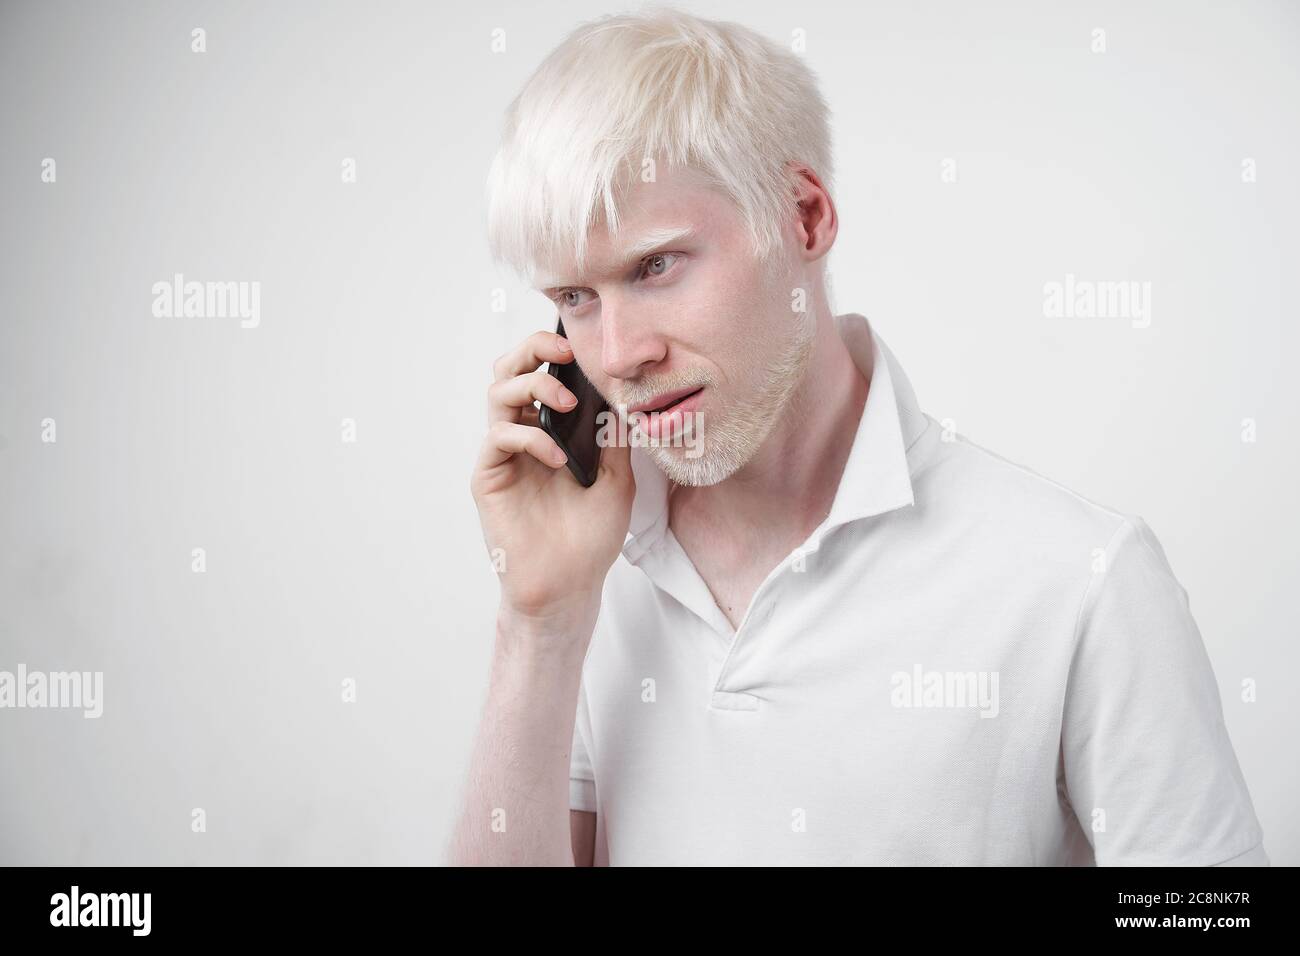 albinism albino man white skin hair studio dressed t-shirt isolated white background abnormal deviations unusual appearance abnormality Beautiful people Talking on the phone. Stock Photo